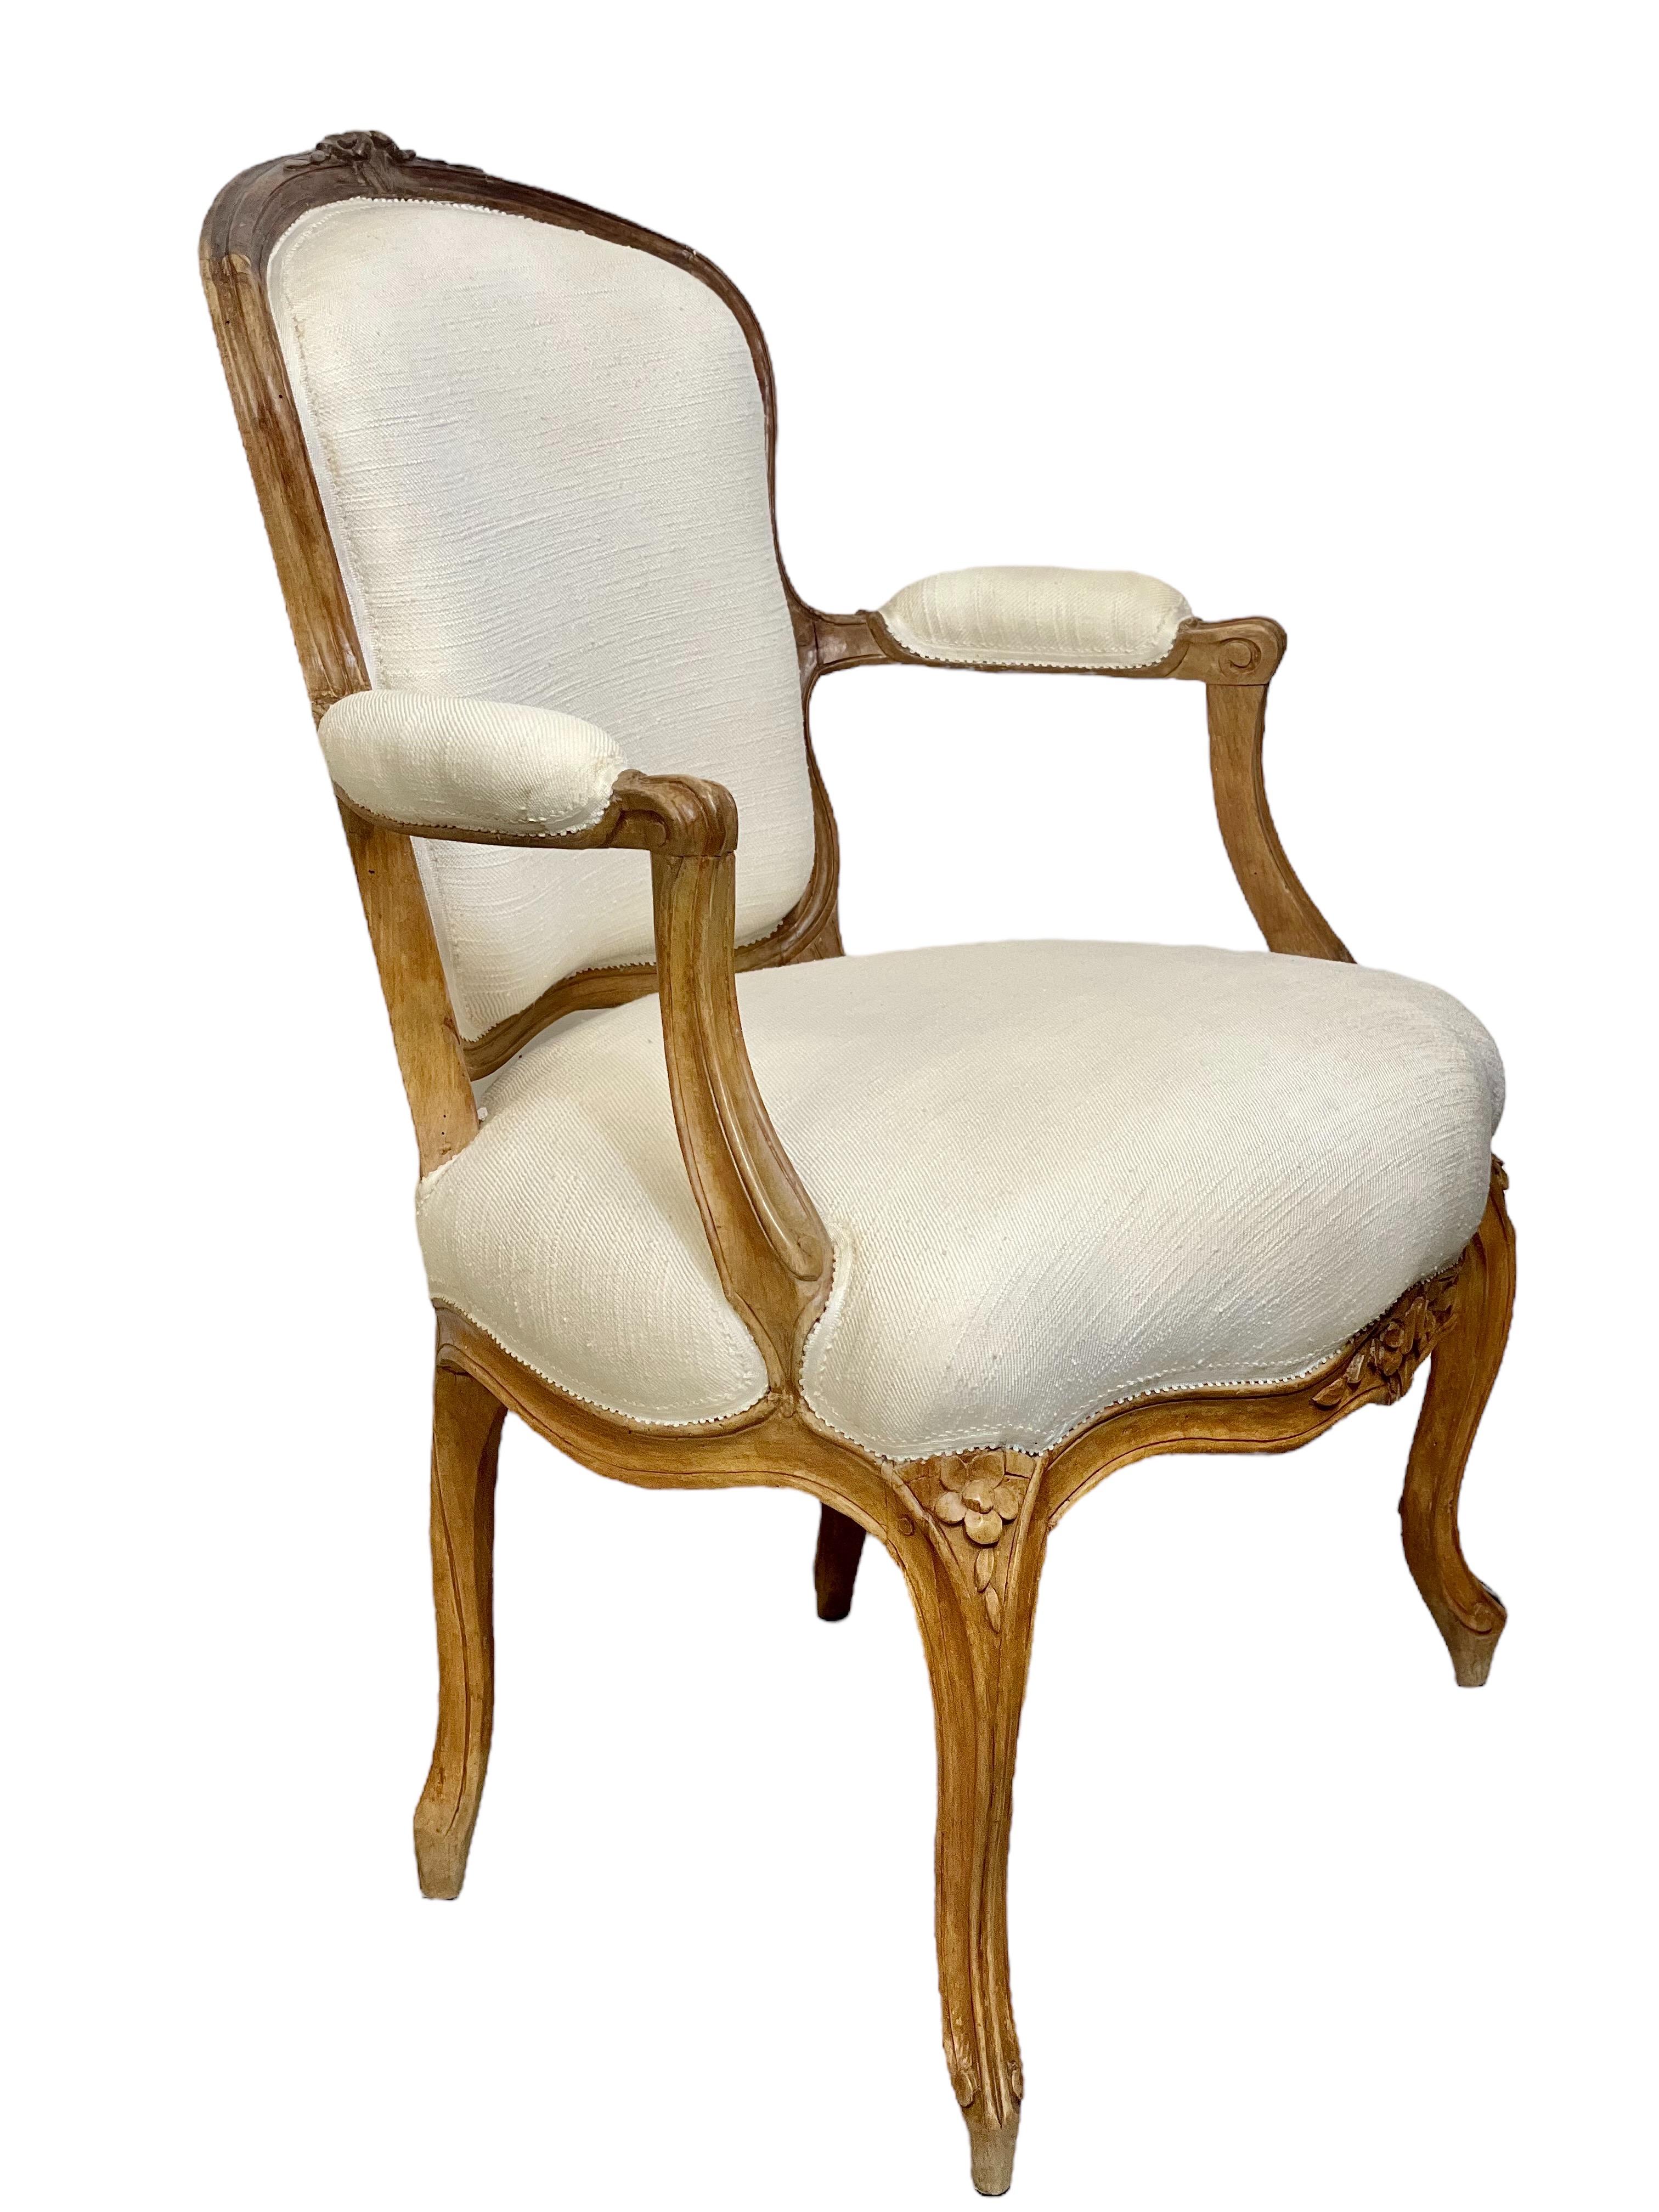 Régence Louis XV Period Pair of Walnut Cabriolets Armchairs, 18th Century